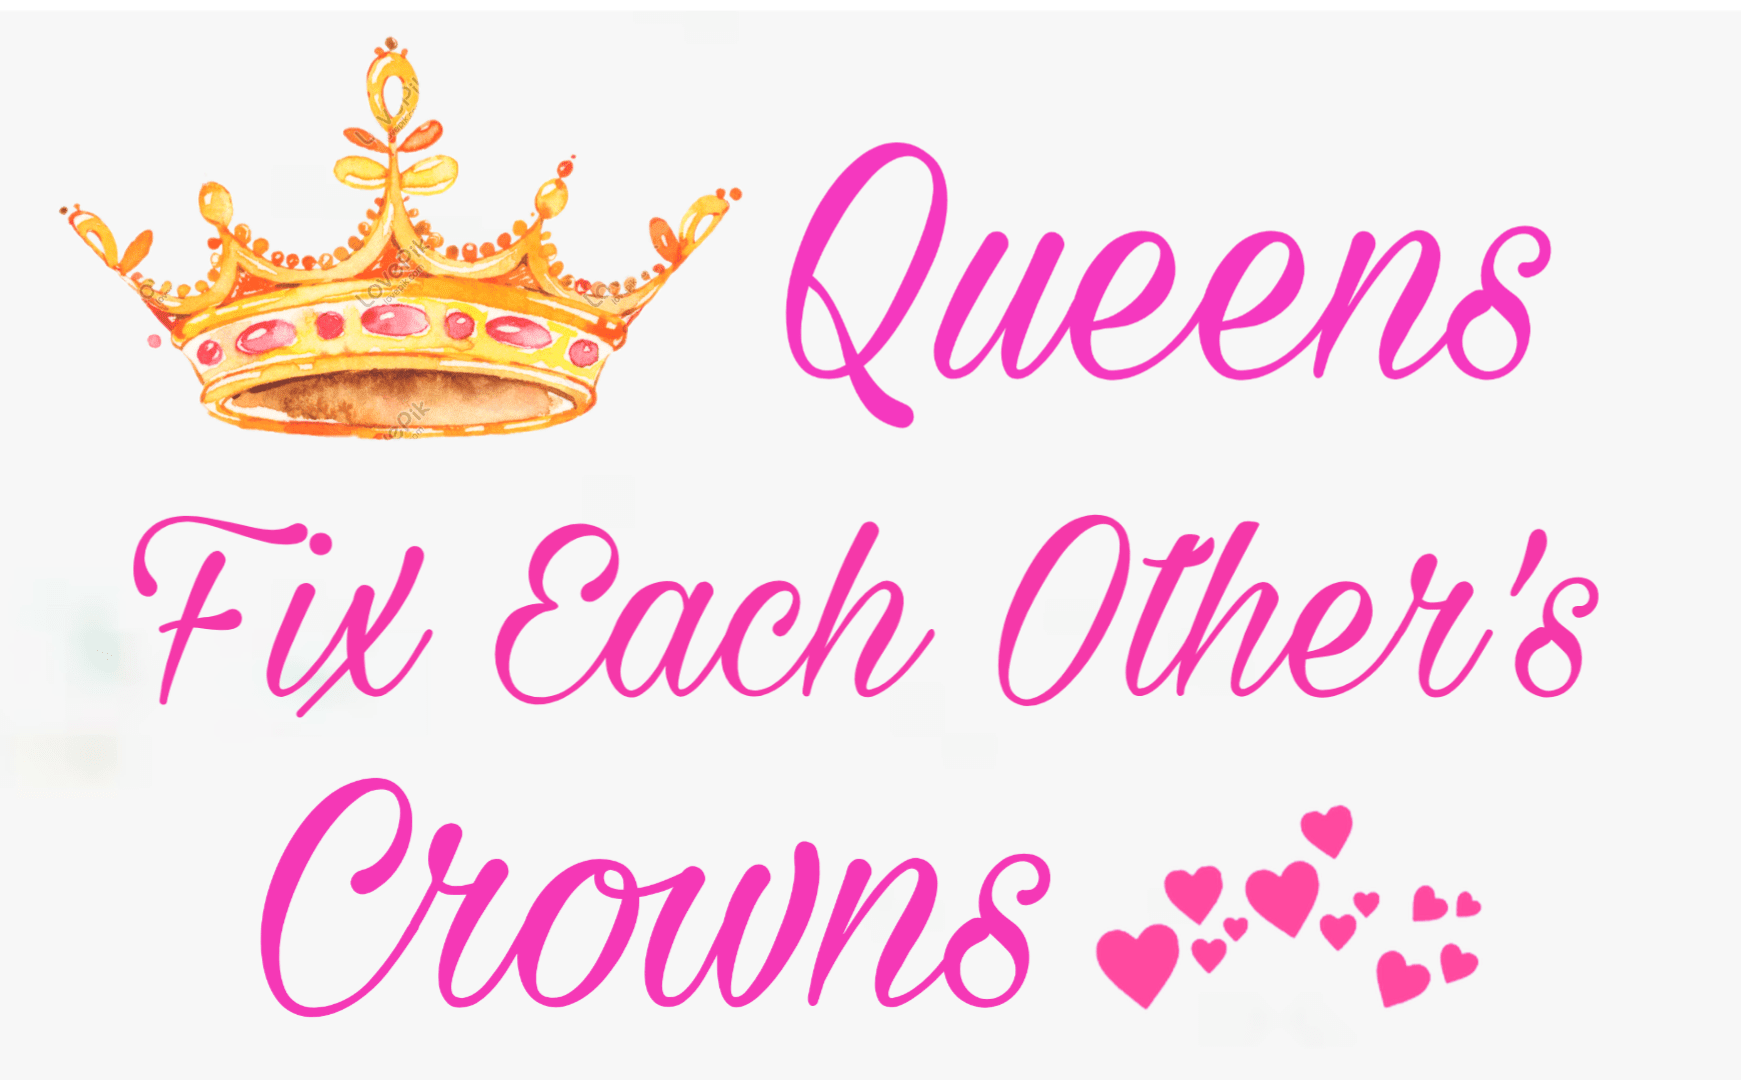 Queens Fix Each Other's Crowns